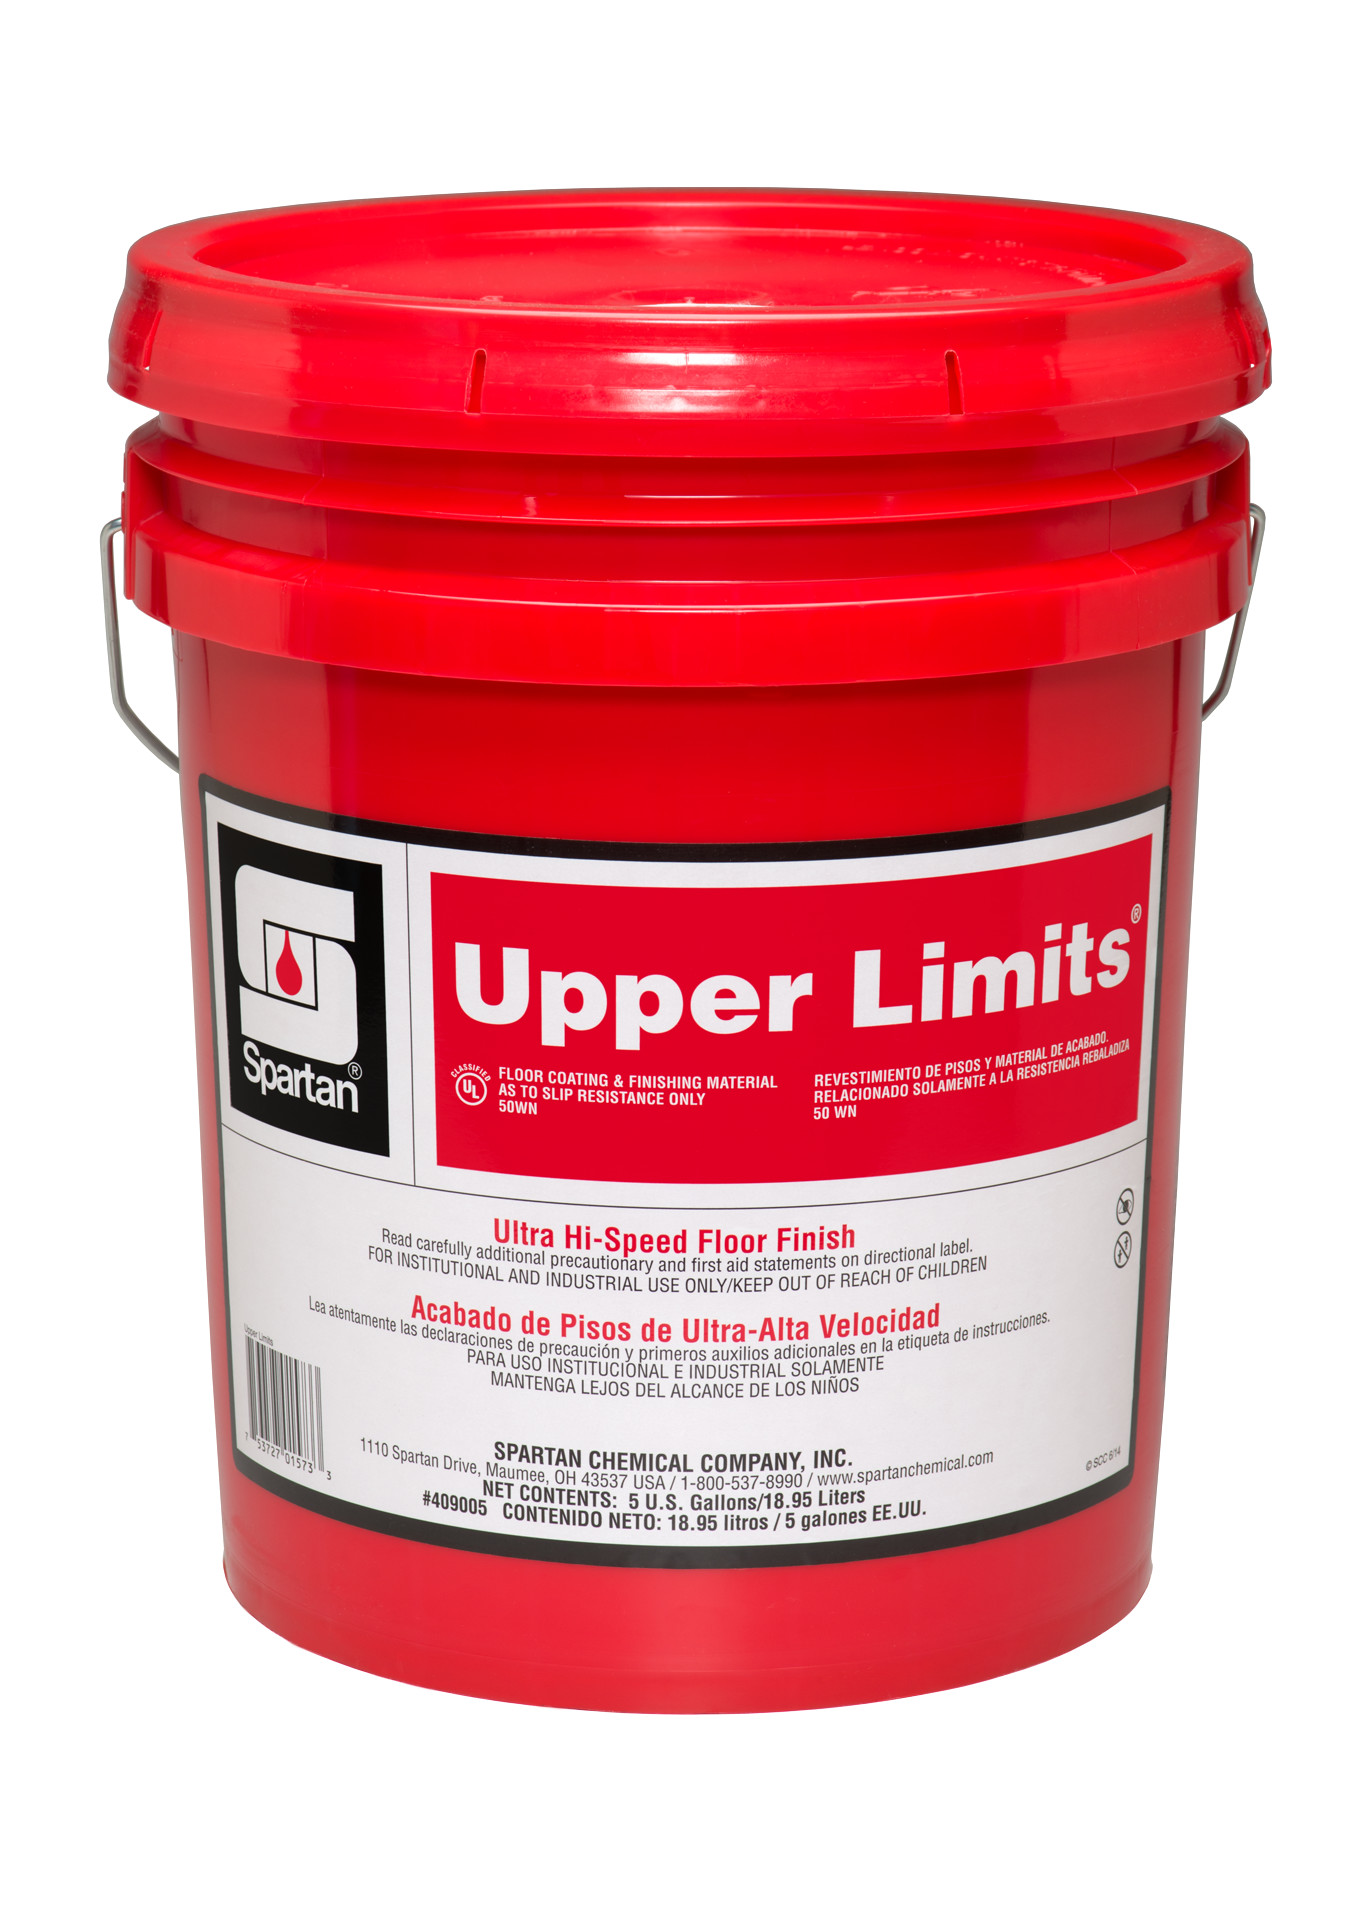 Spartan Chemical Company Upper Limits, 5 GAL PAIL